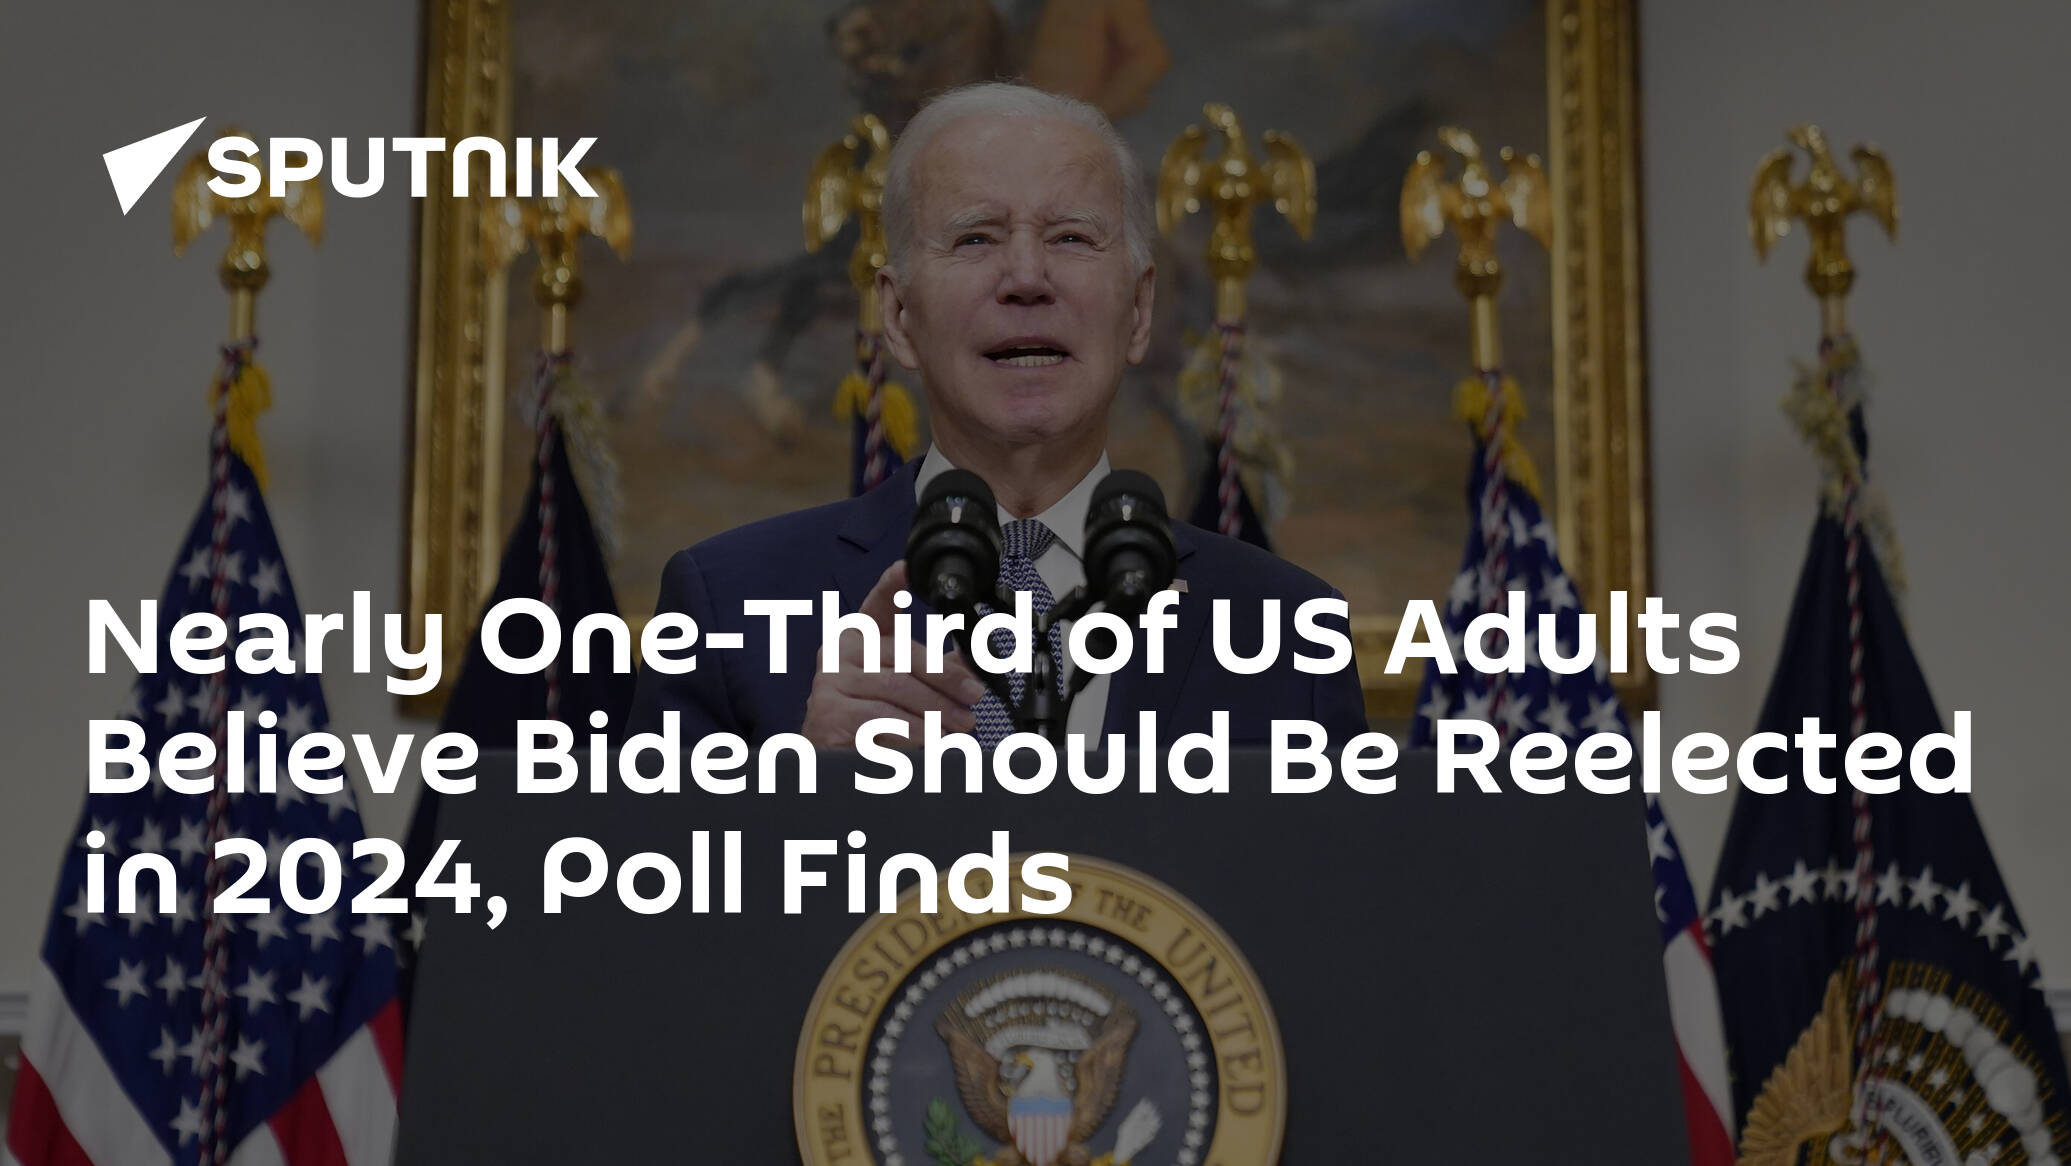 Nearly One-Third of US Adults Believe Biden Should Be Reelected in 2024, Poll Finds